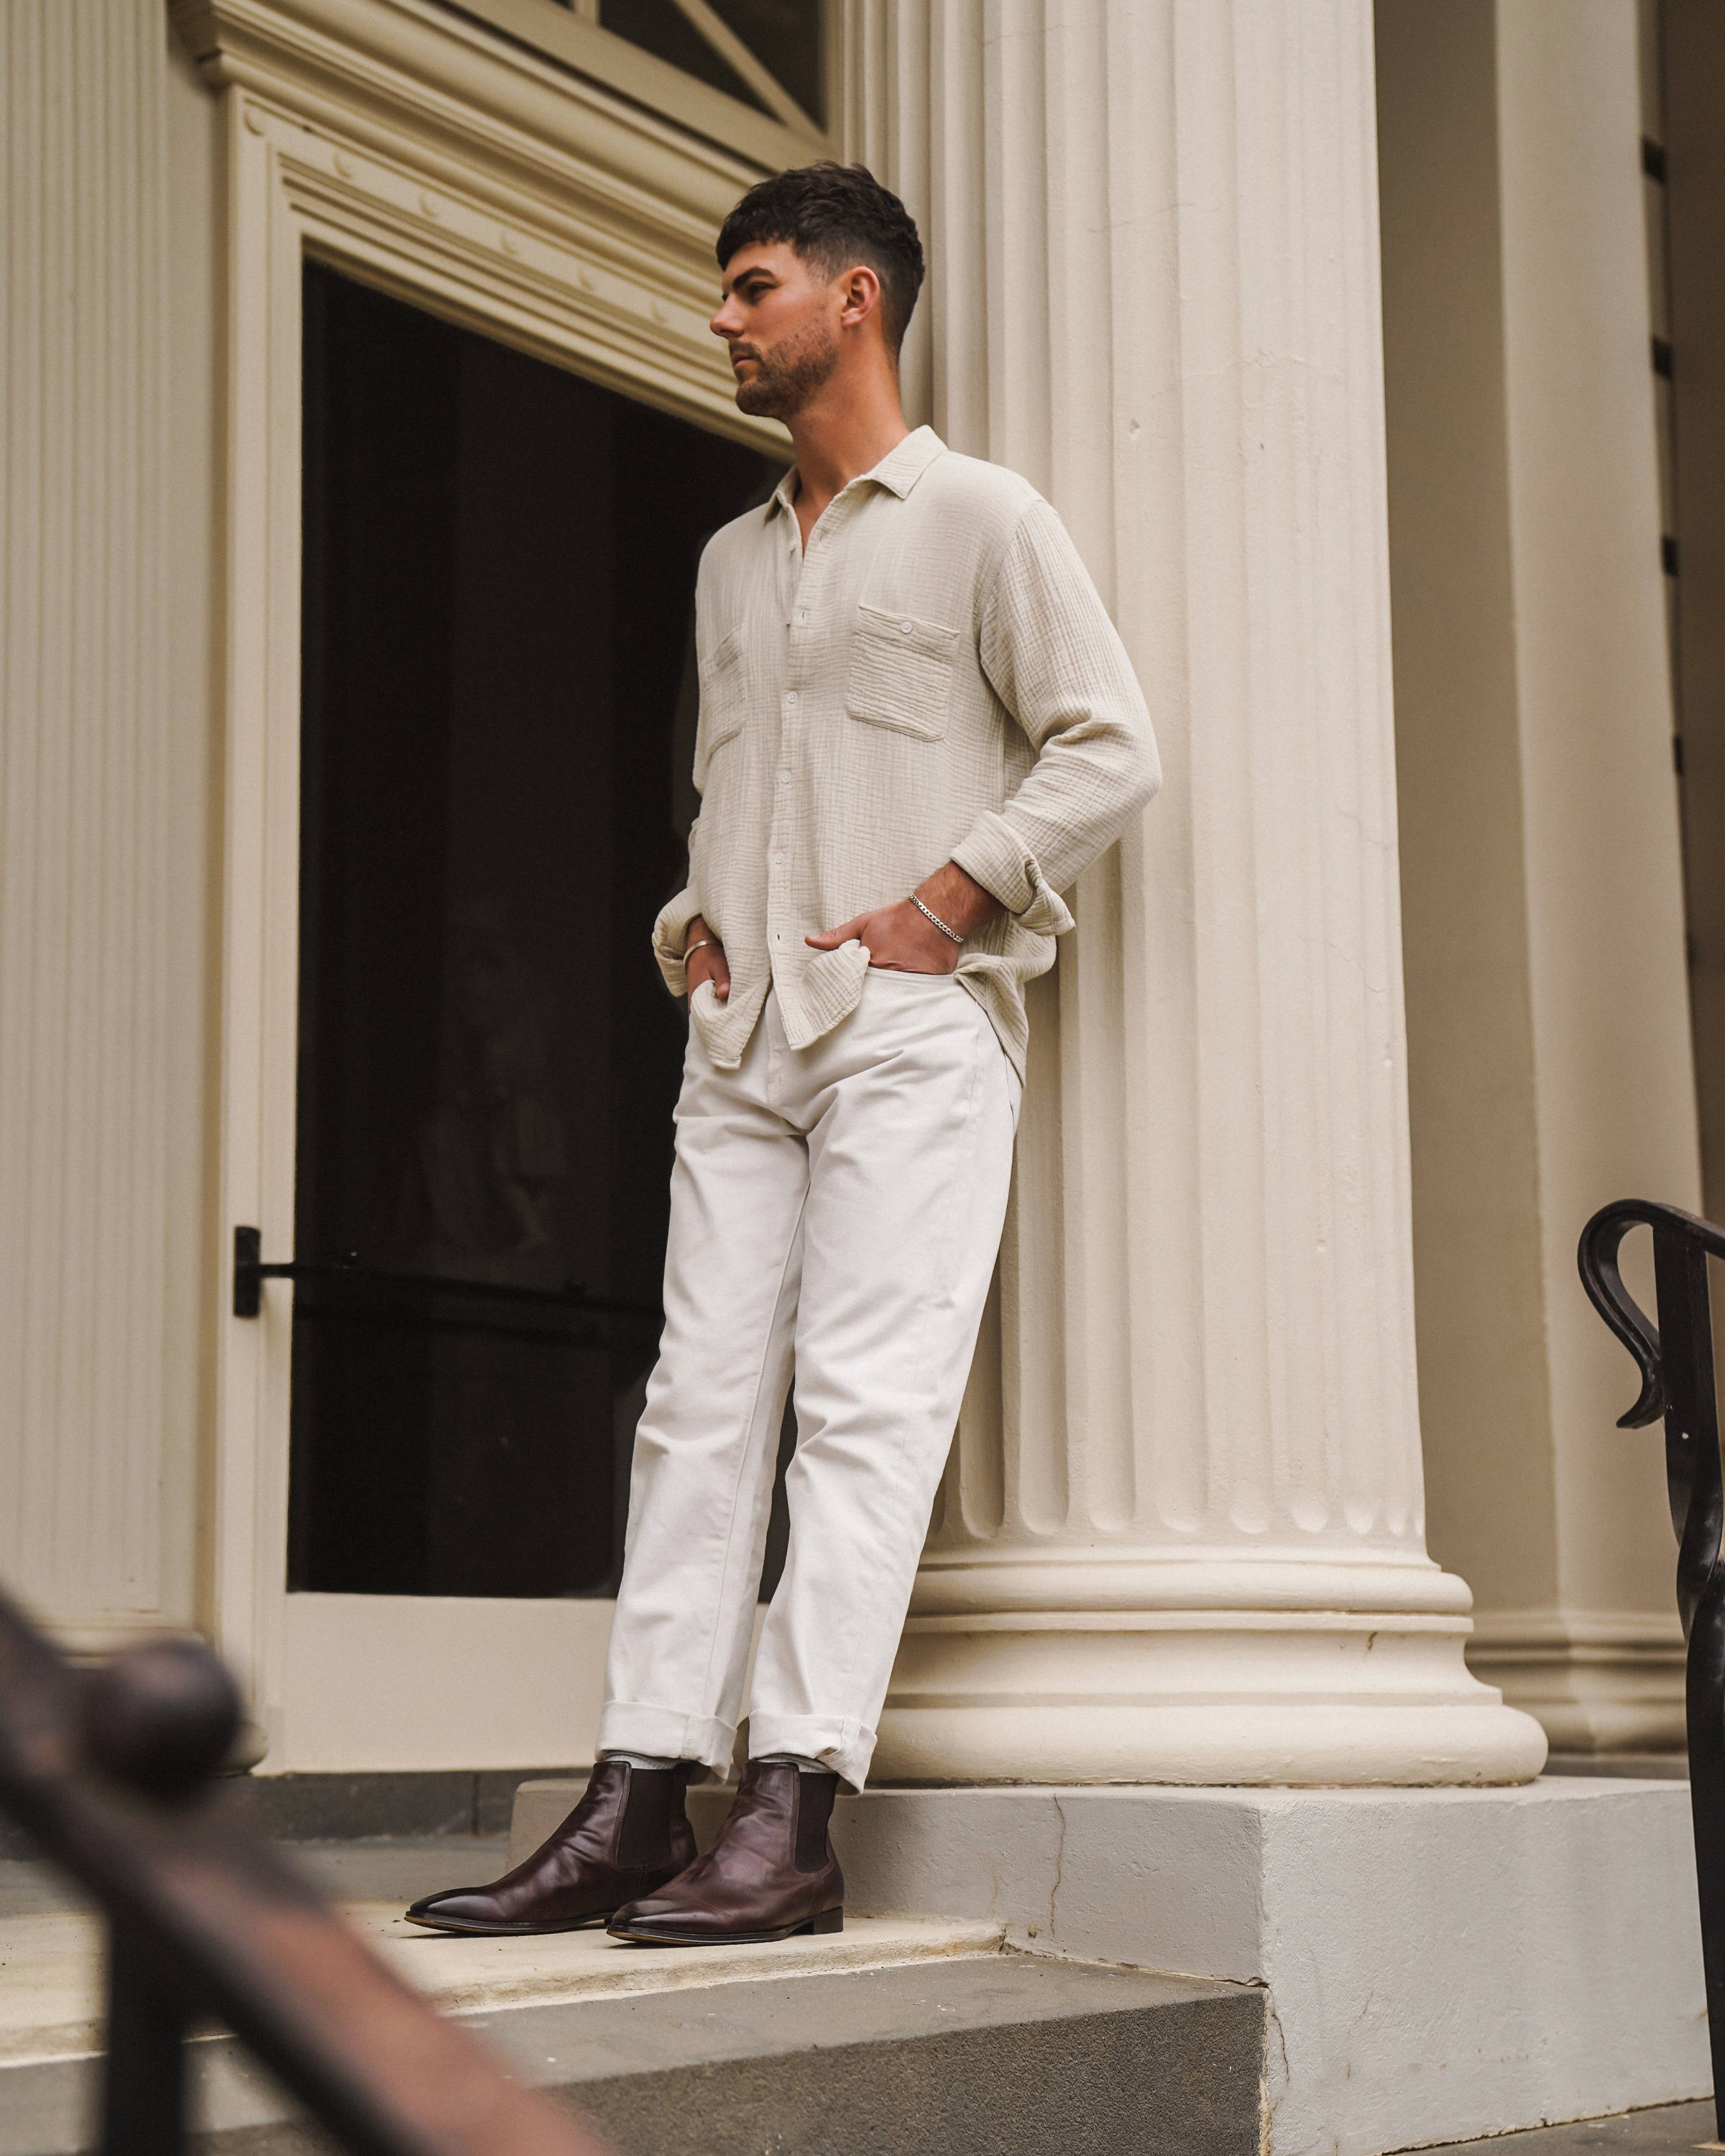 The Osbourne 2.0 Chelsea Boots in Oxblood worn with white pants and off-white shirt